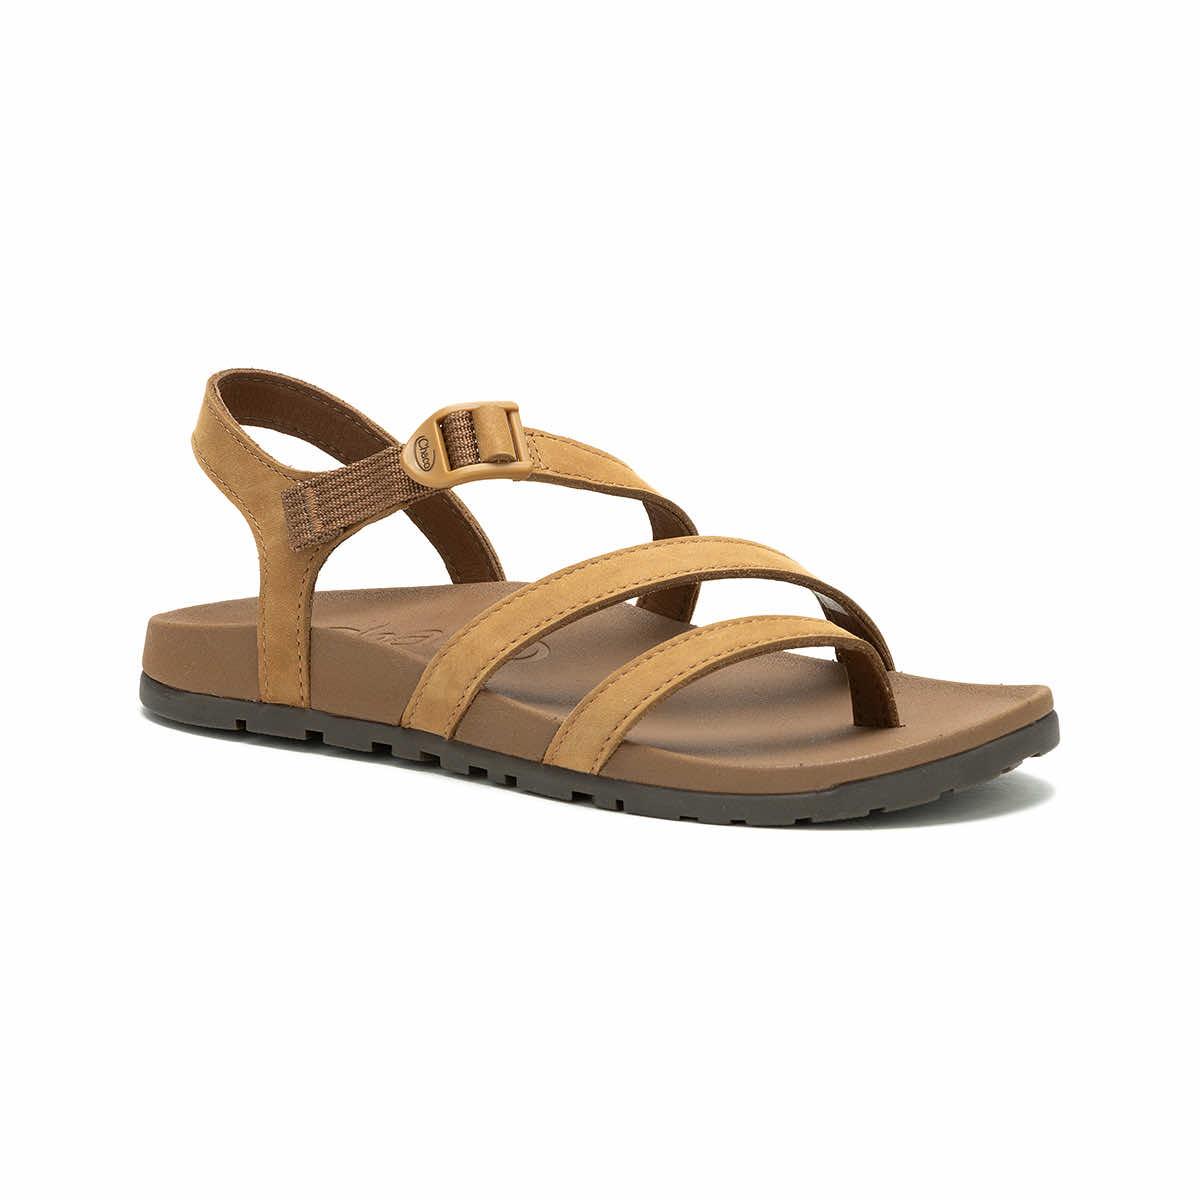 Chaco classic leather flip - Gem